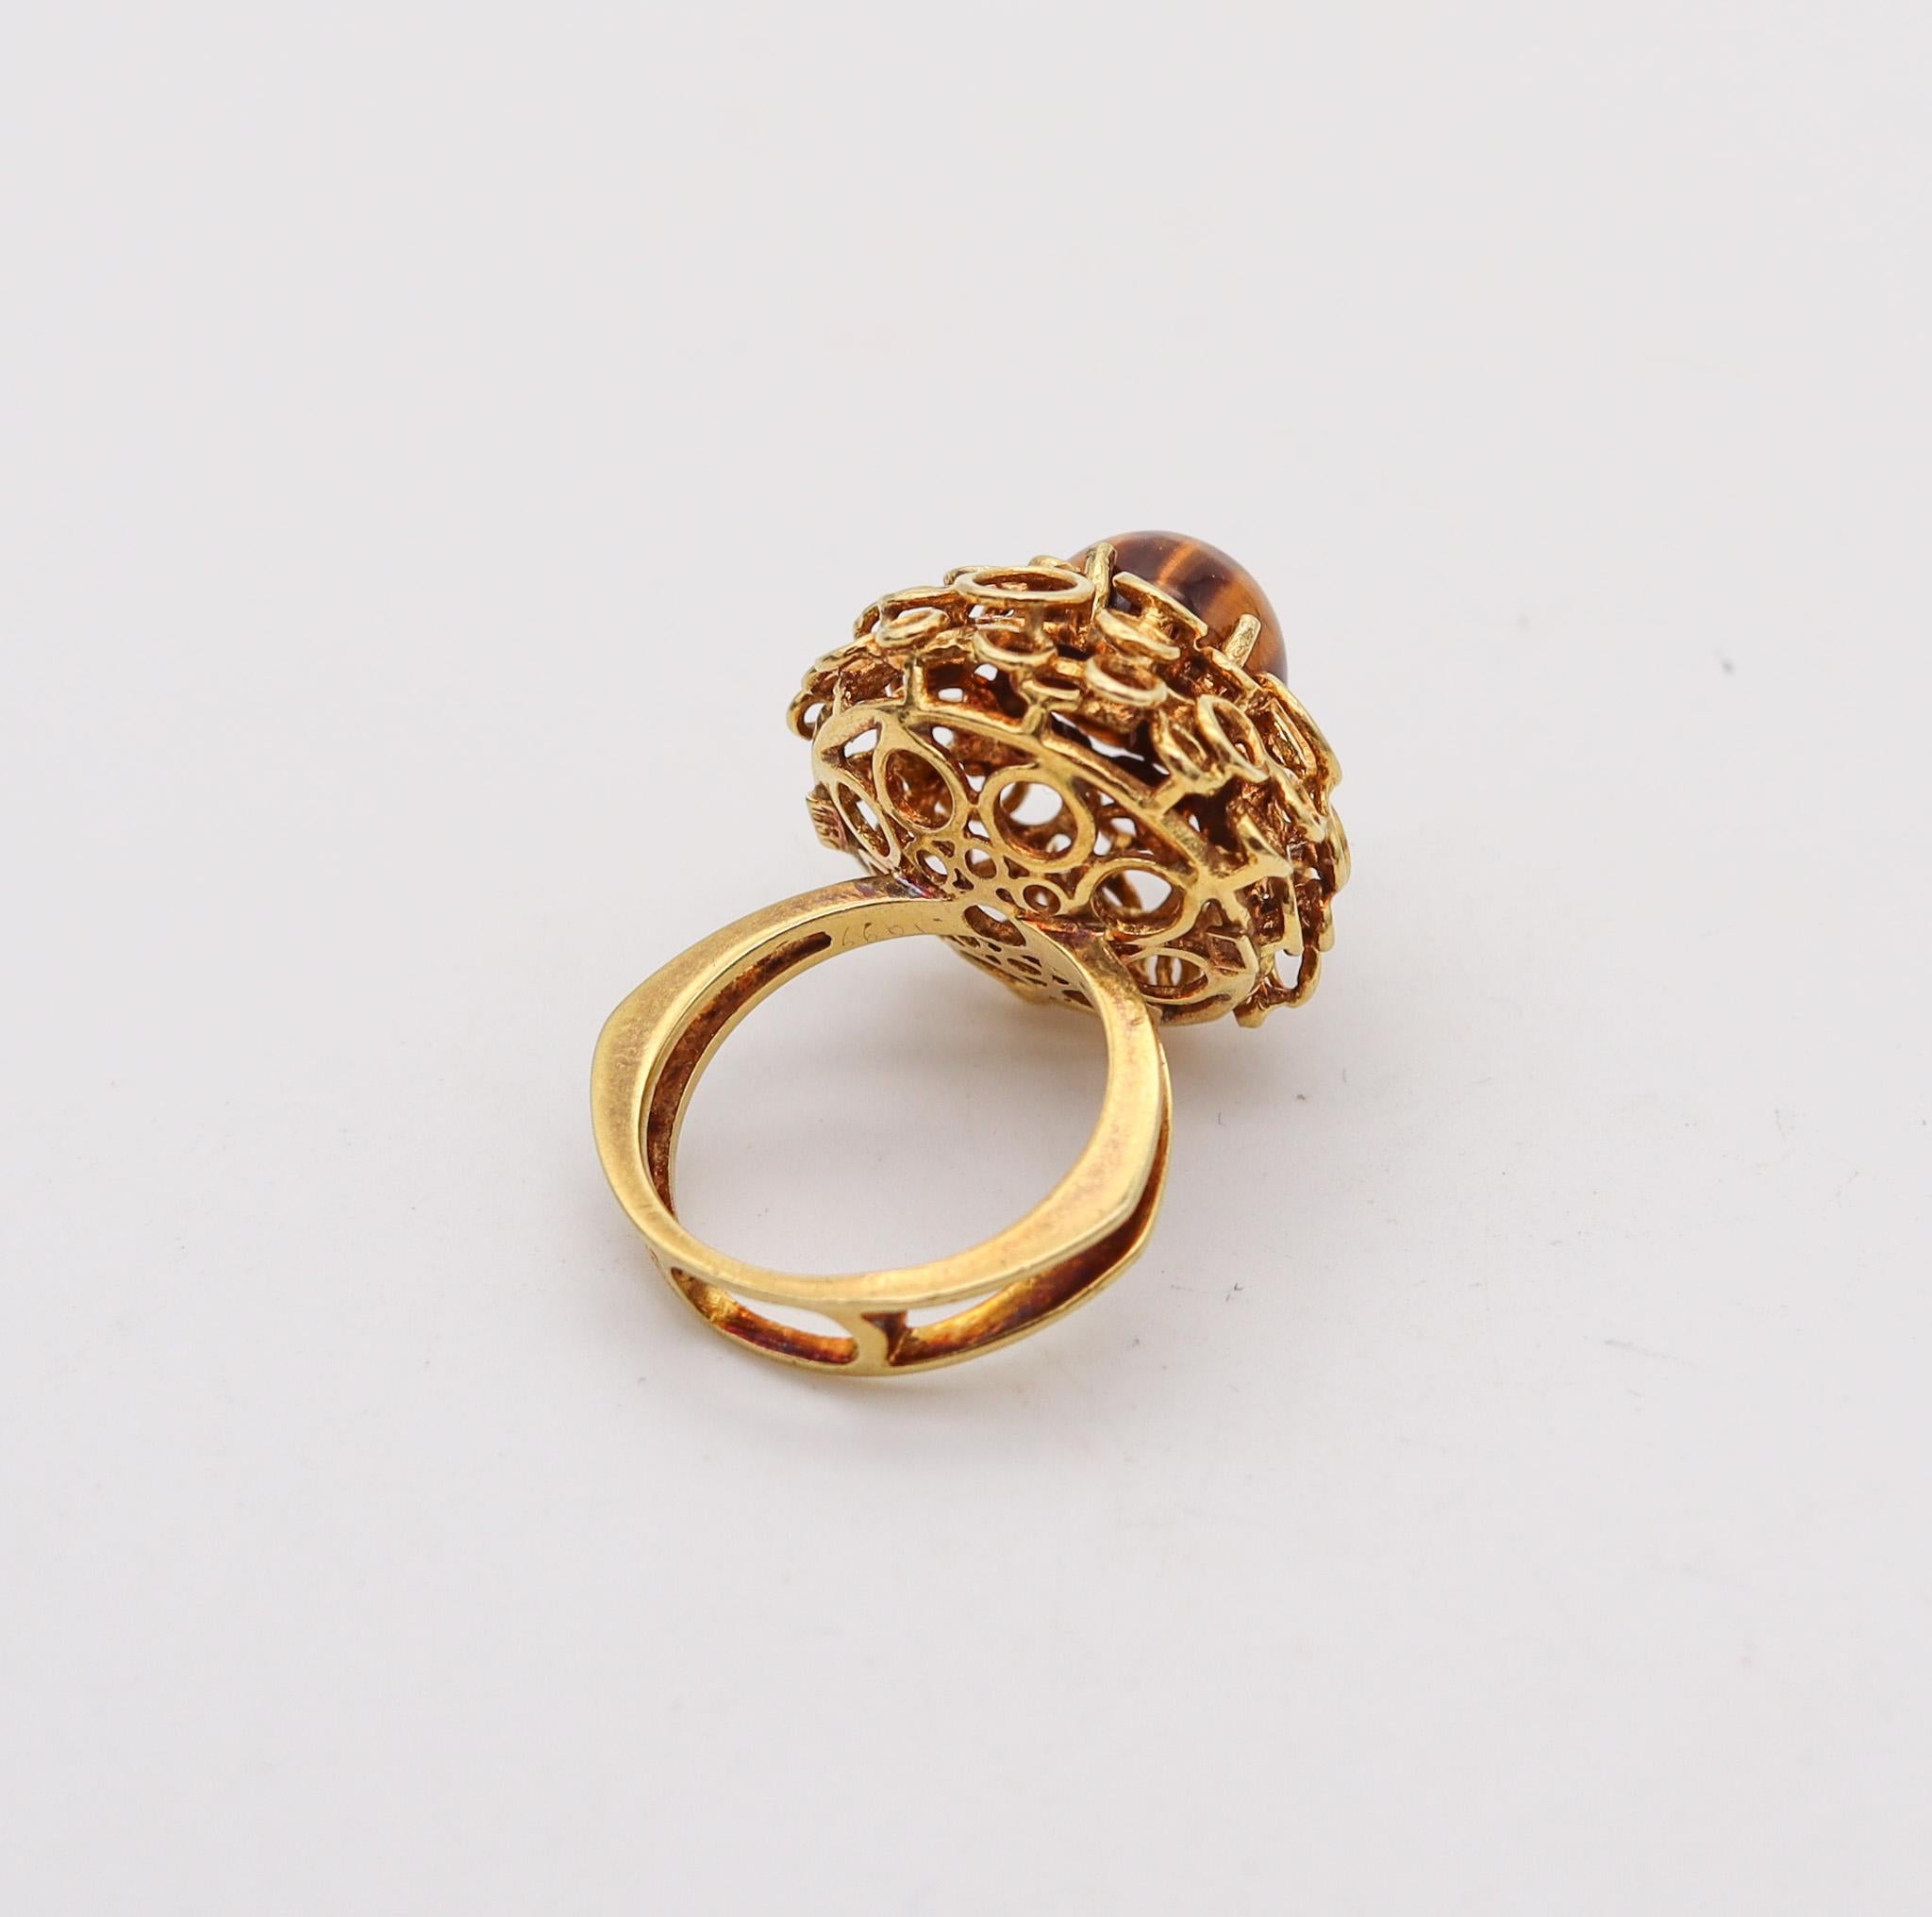 Women's Modernist 1970 Sculptural Cocktail Ring In Solid 18Kt Gold With Tiger Eye Cab For Sale